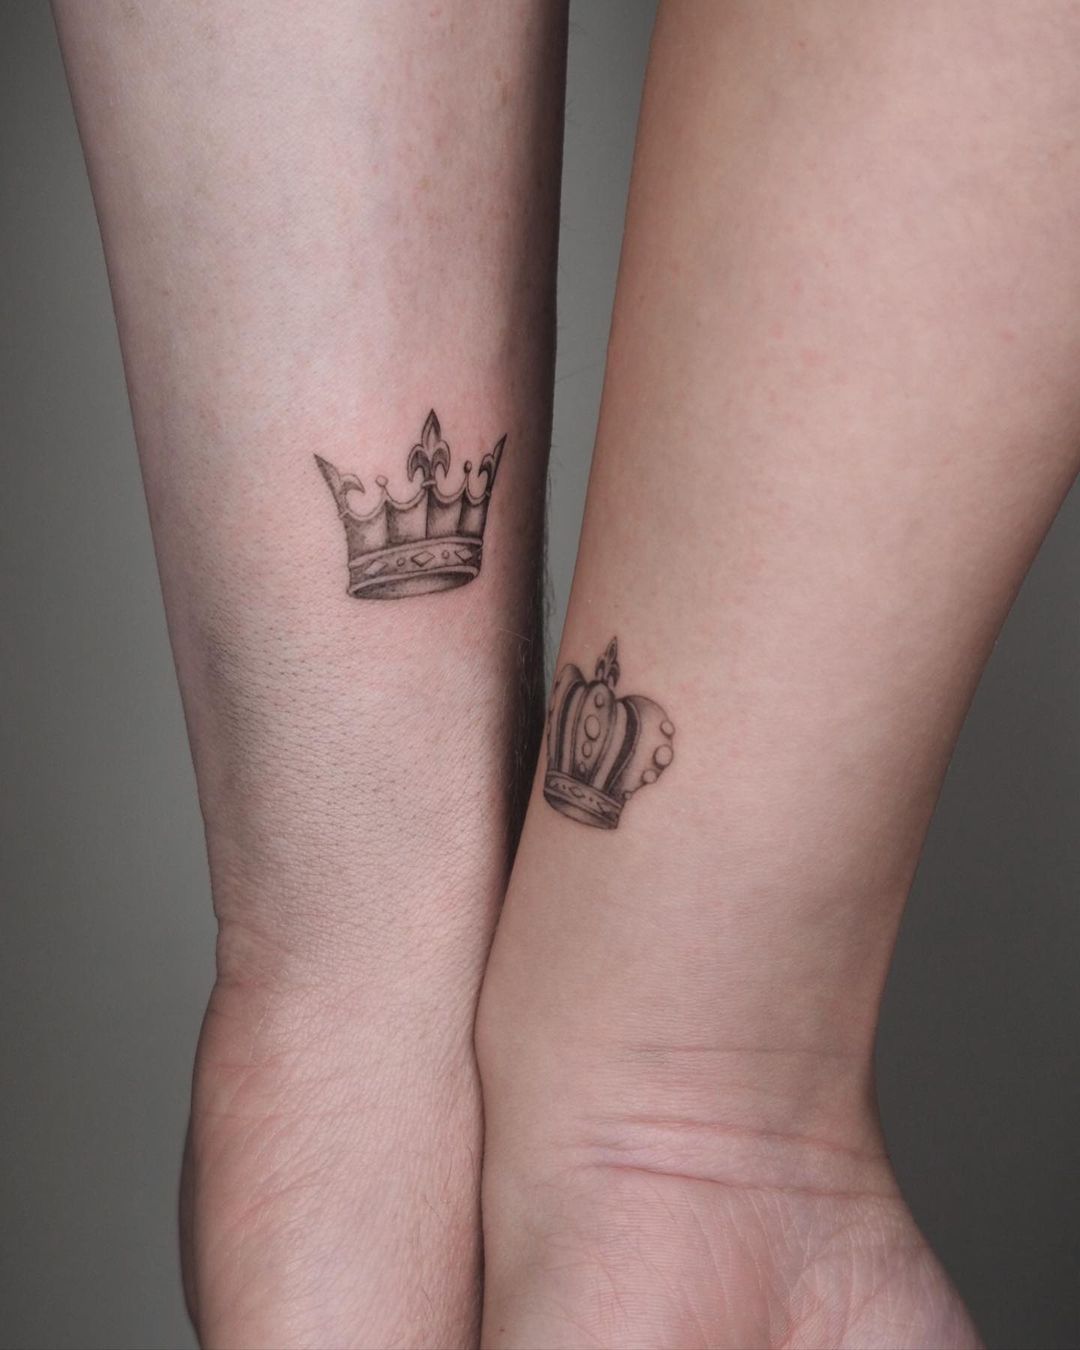 Matching couples crown tattoos, crow tattoo, couple's tattoos, hand tattoo,  small tattoo | Matching tattoos, Hand tattoos, Couple tattoos